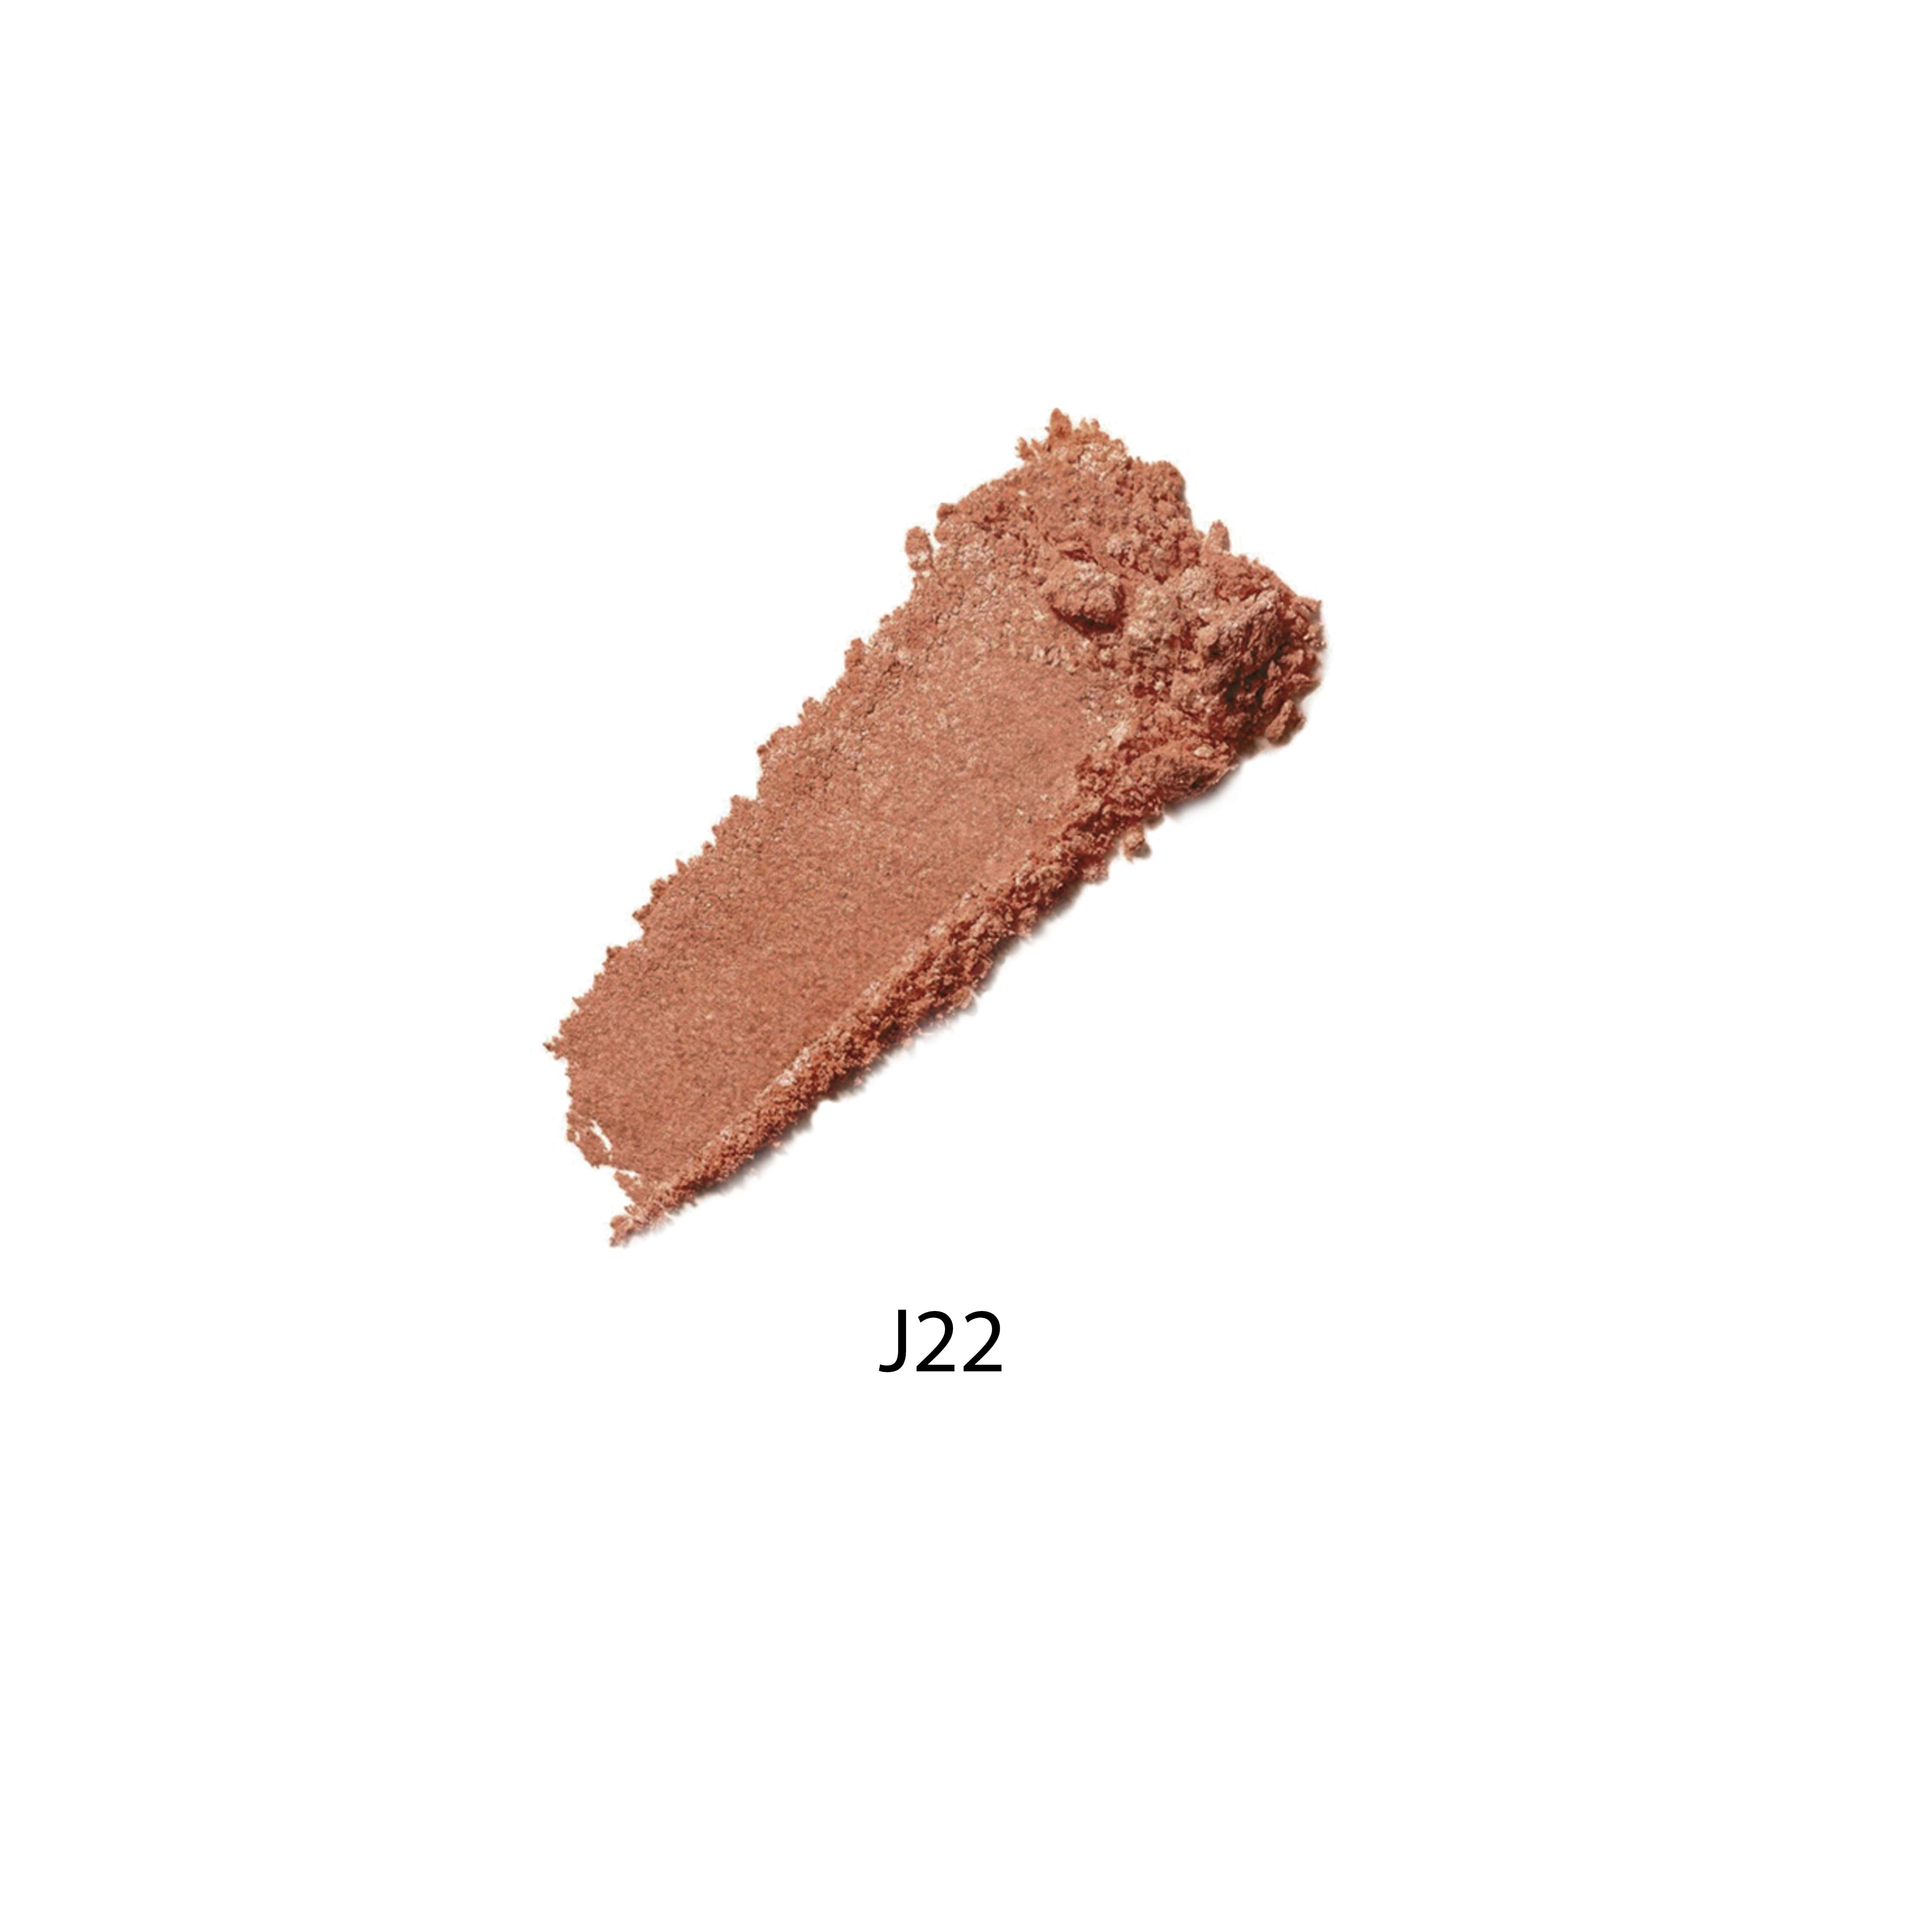 Soft and Mild Cheek Color